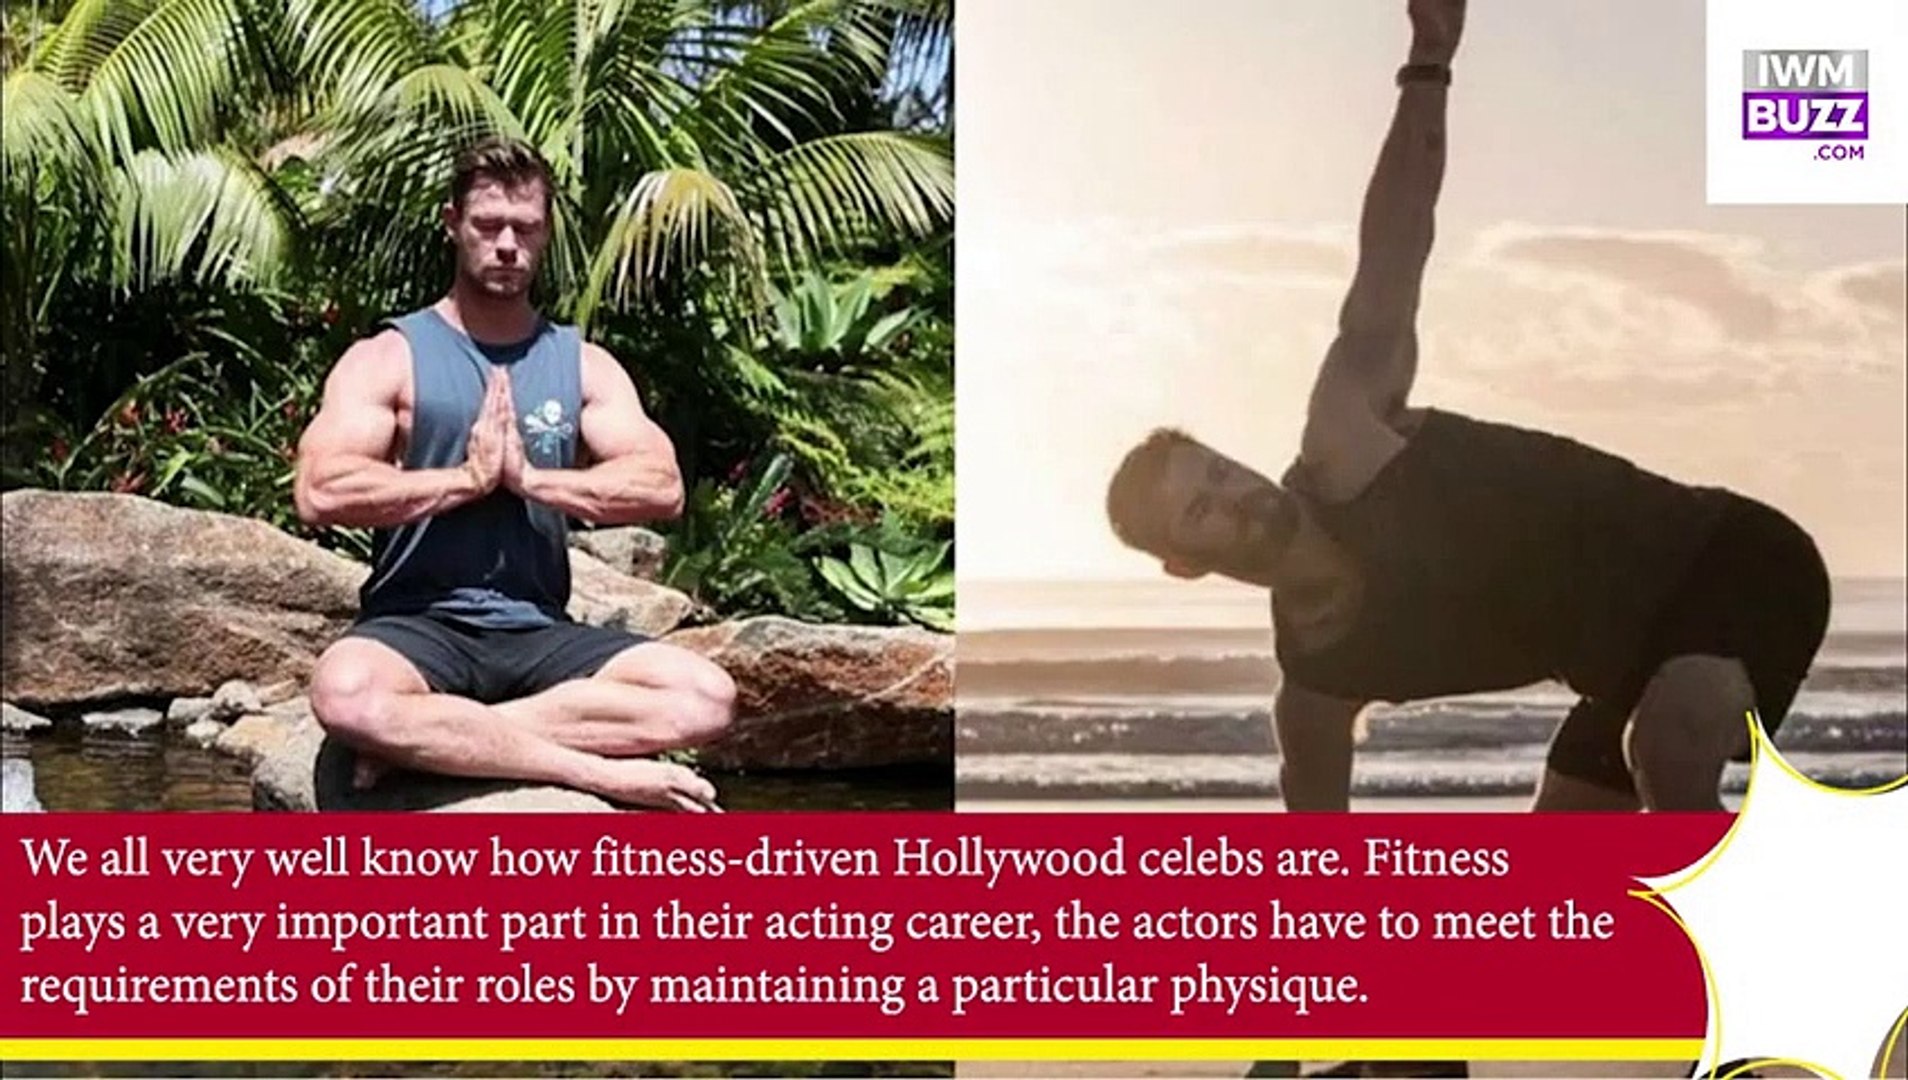 Do Yoga To Burn Off The Crazy Calories: Start Your Yoga Journey With Chris  Hemsworth